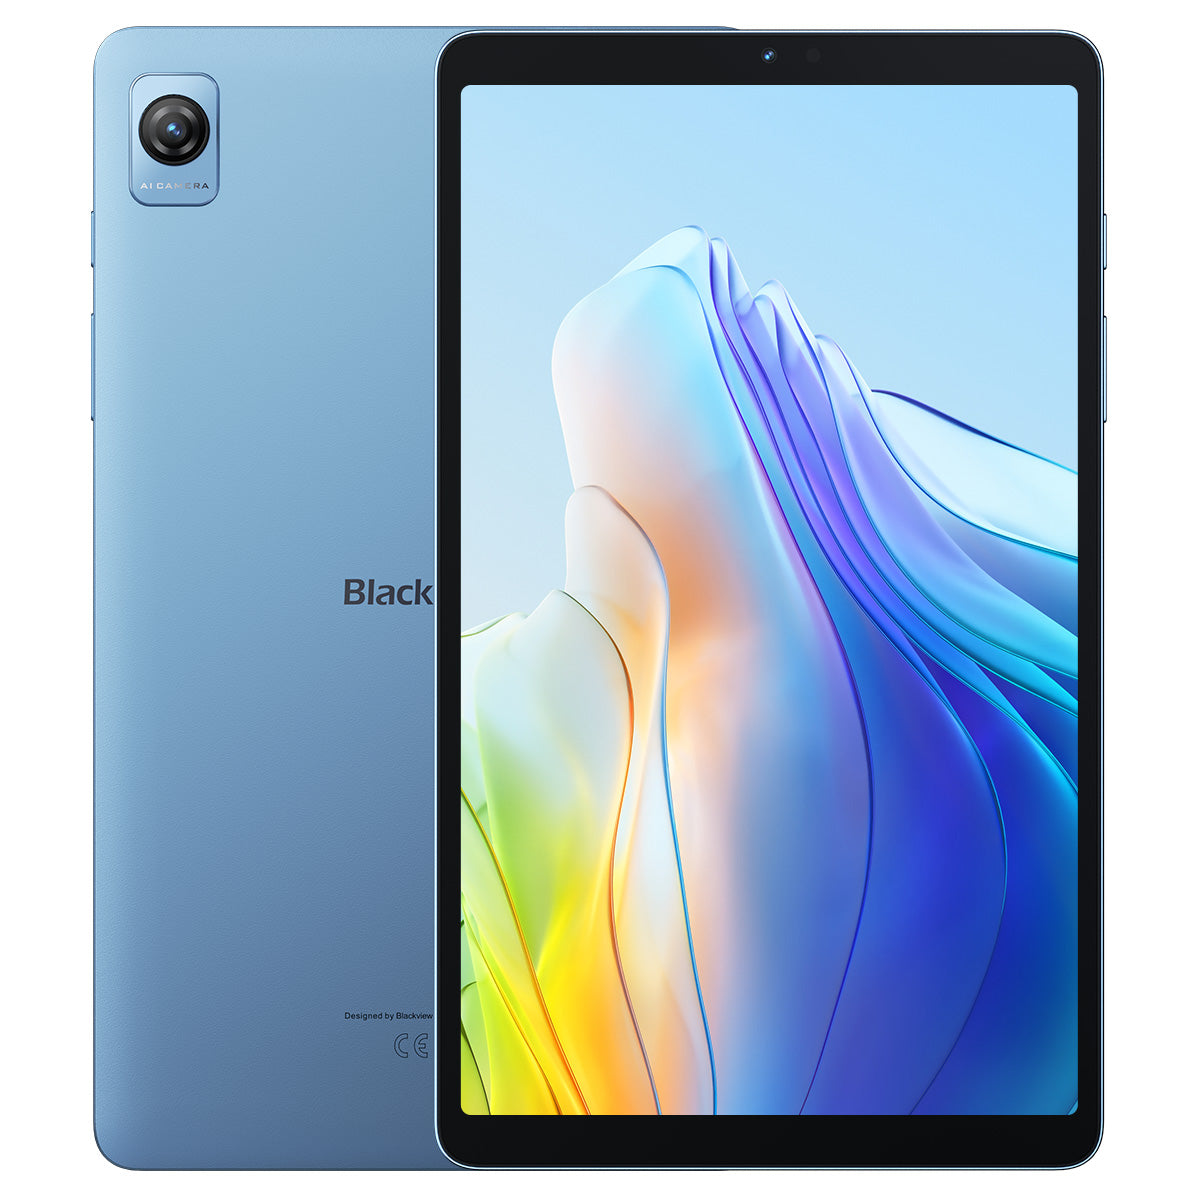 

Blackview Tab 60 8.68-inch Unisoc T606 Octa-core 4GB/6GB+128GB 6050mAh Widevine L1 Support Android Tablet PC 4GB+128GB / Blue